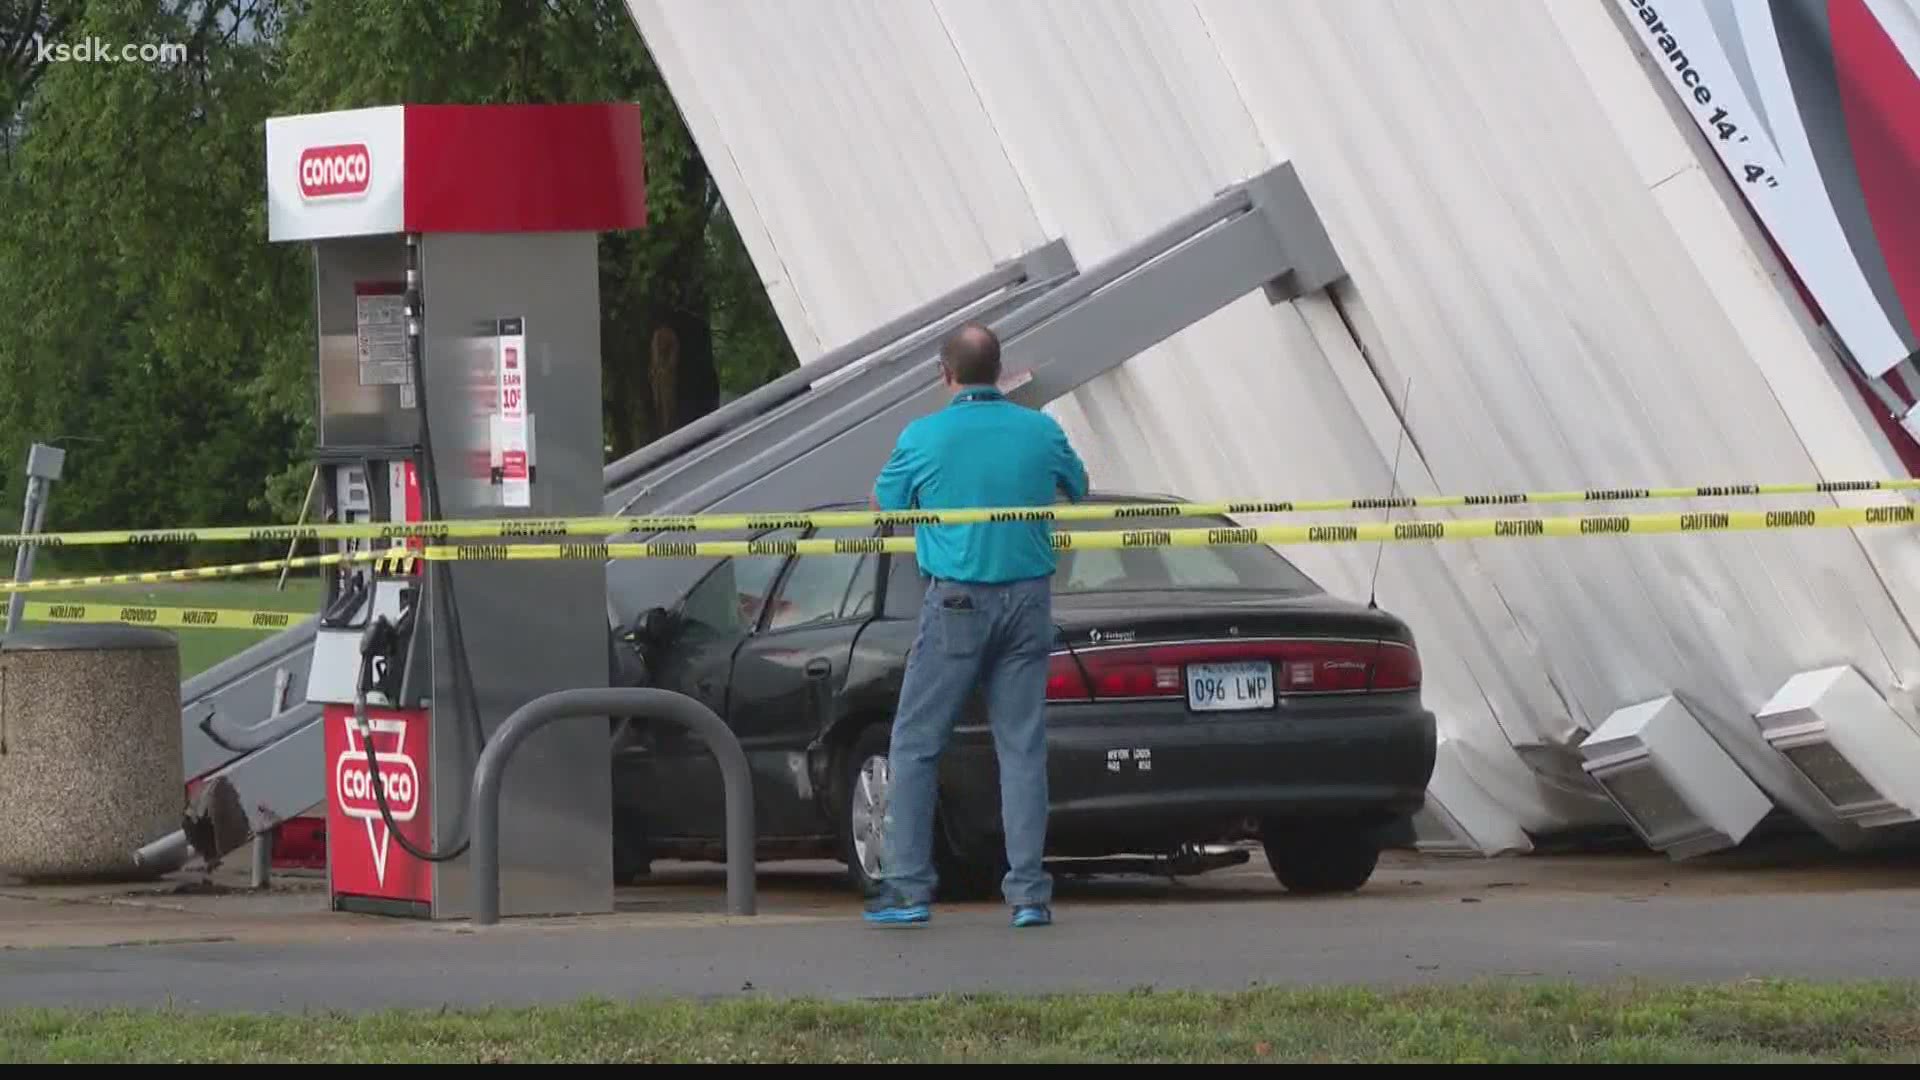 The wind brought down many trees and even a gas station awning.